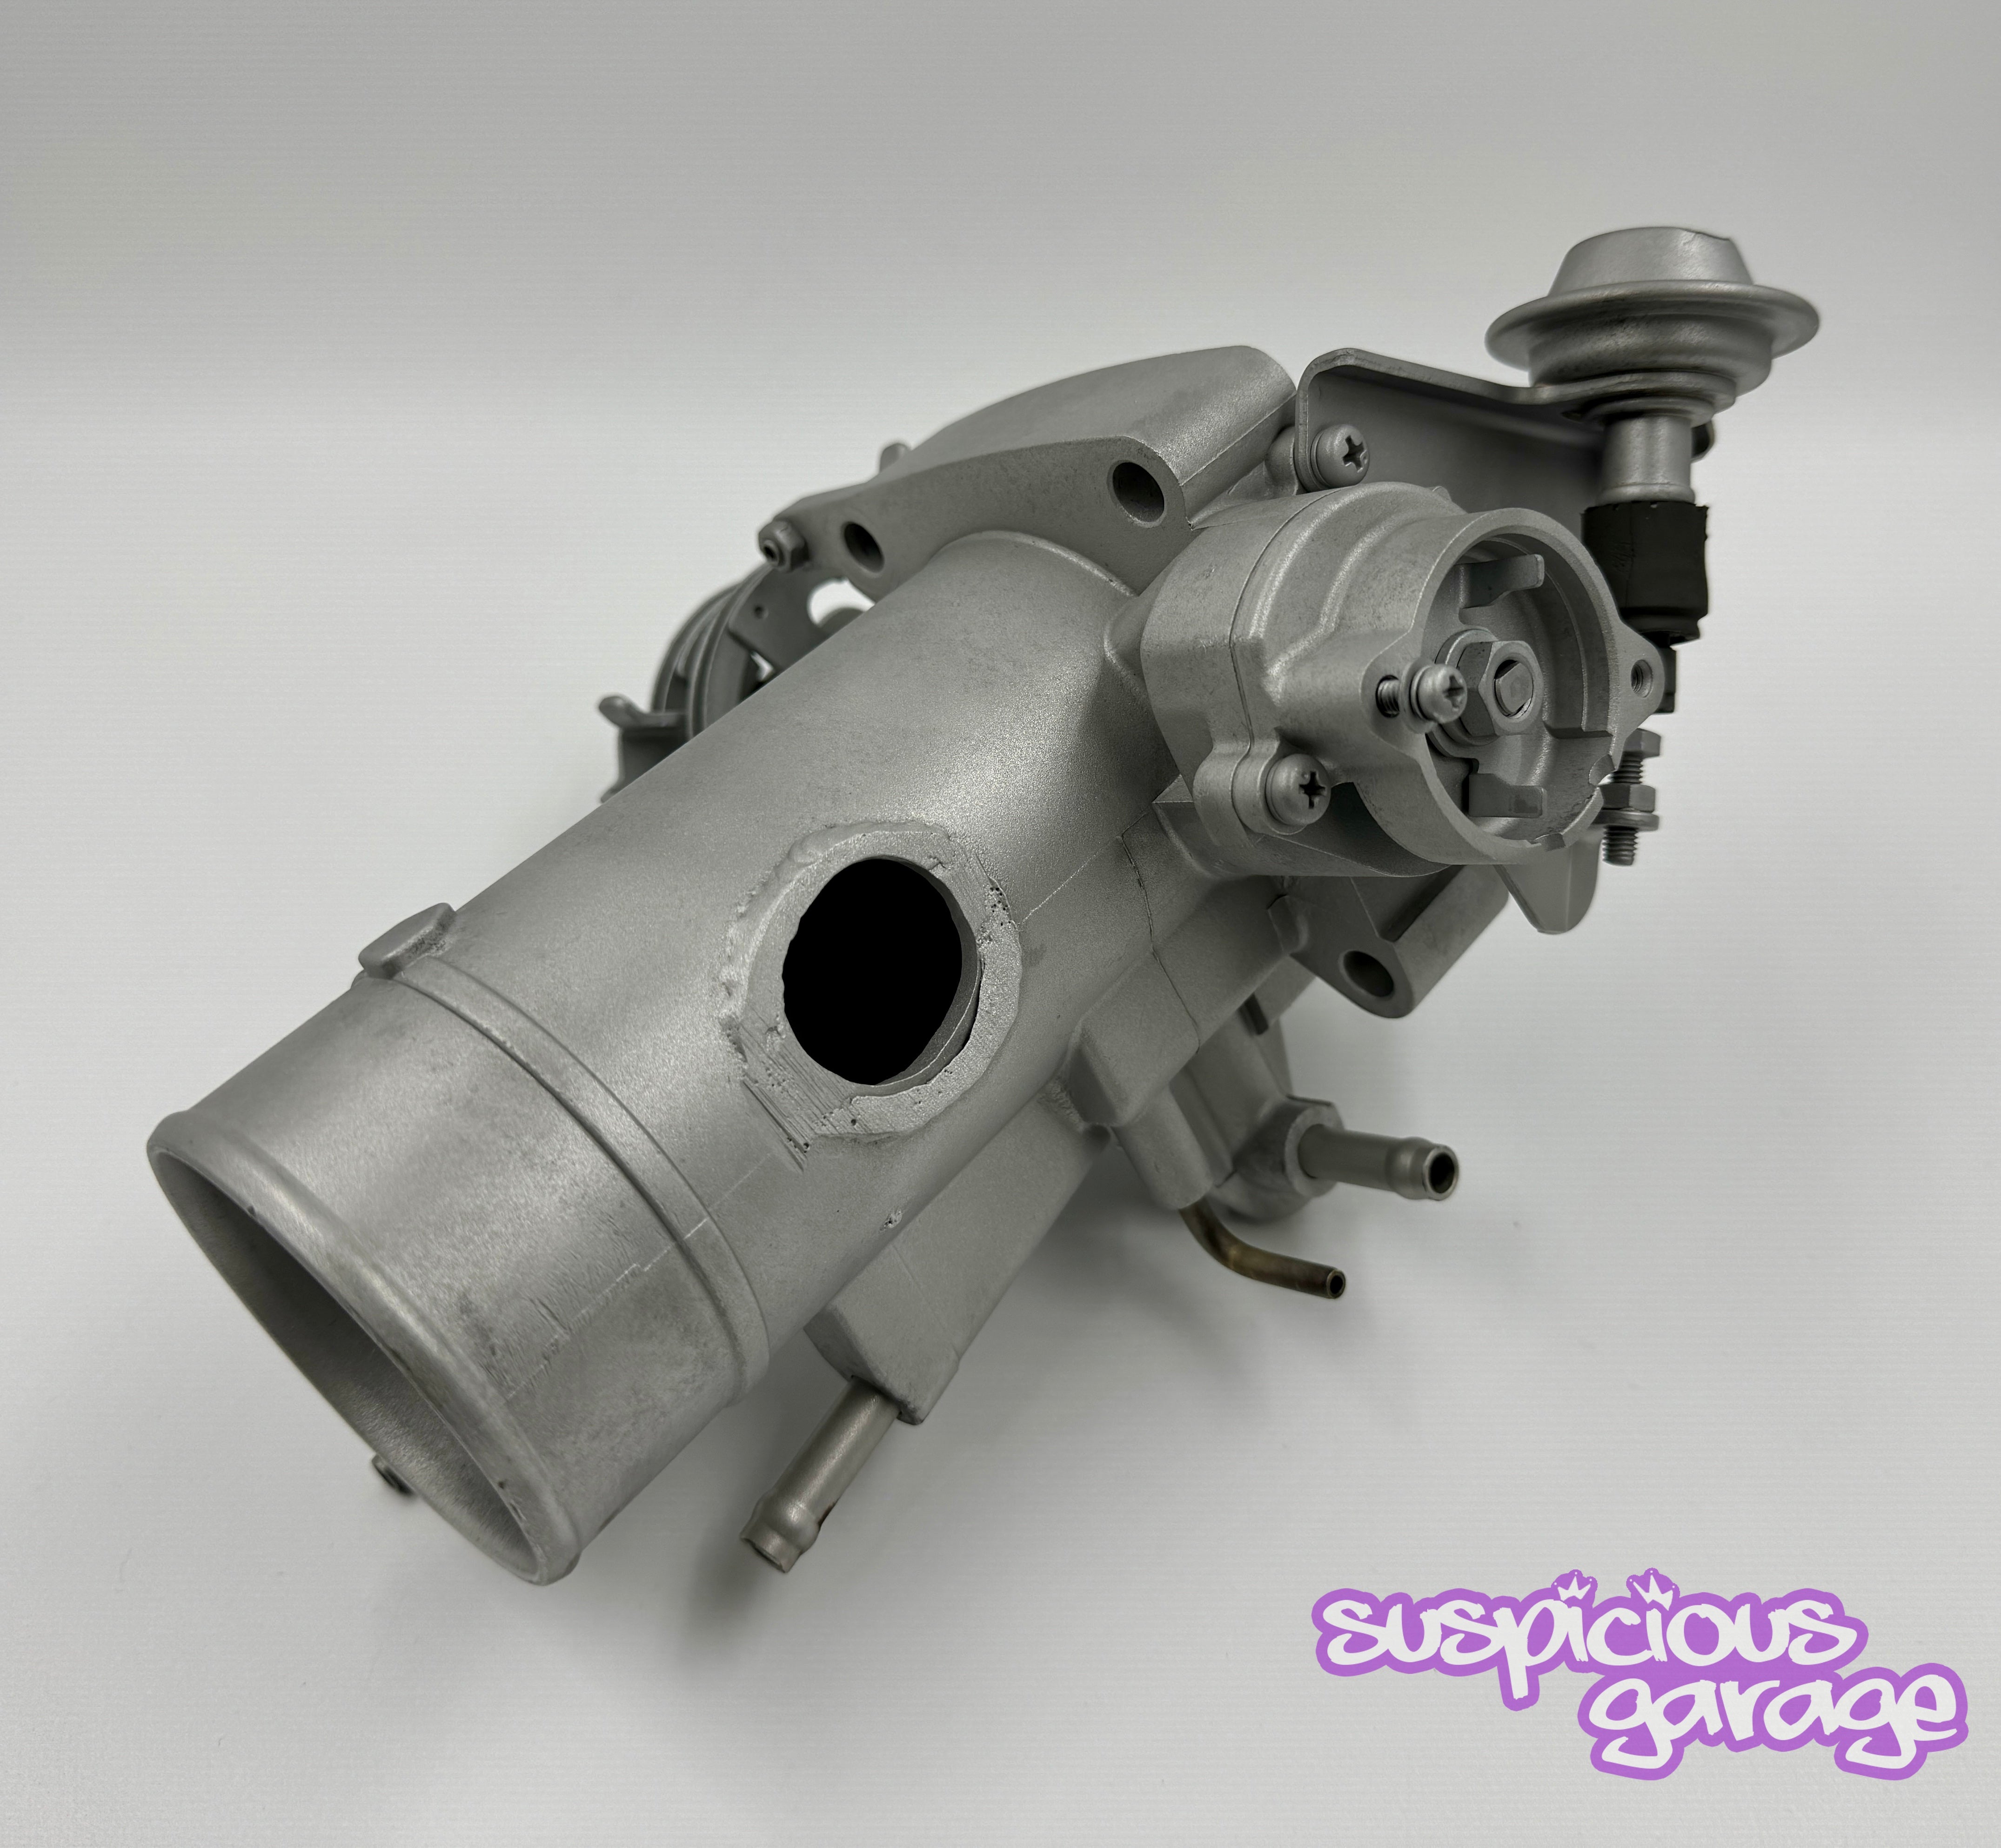 1988-1992 Toyota Chaser Cresta Mark II 1jzgte Non TRC Throttle Body for JZX81 with BOV Port